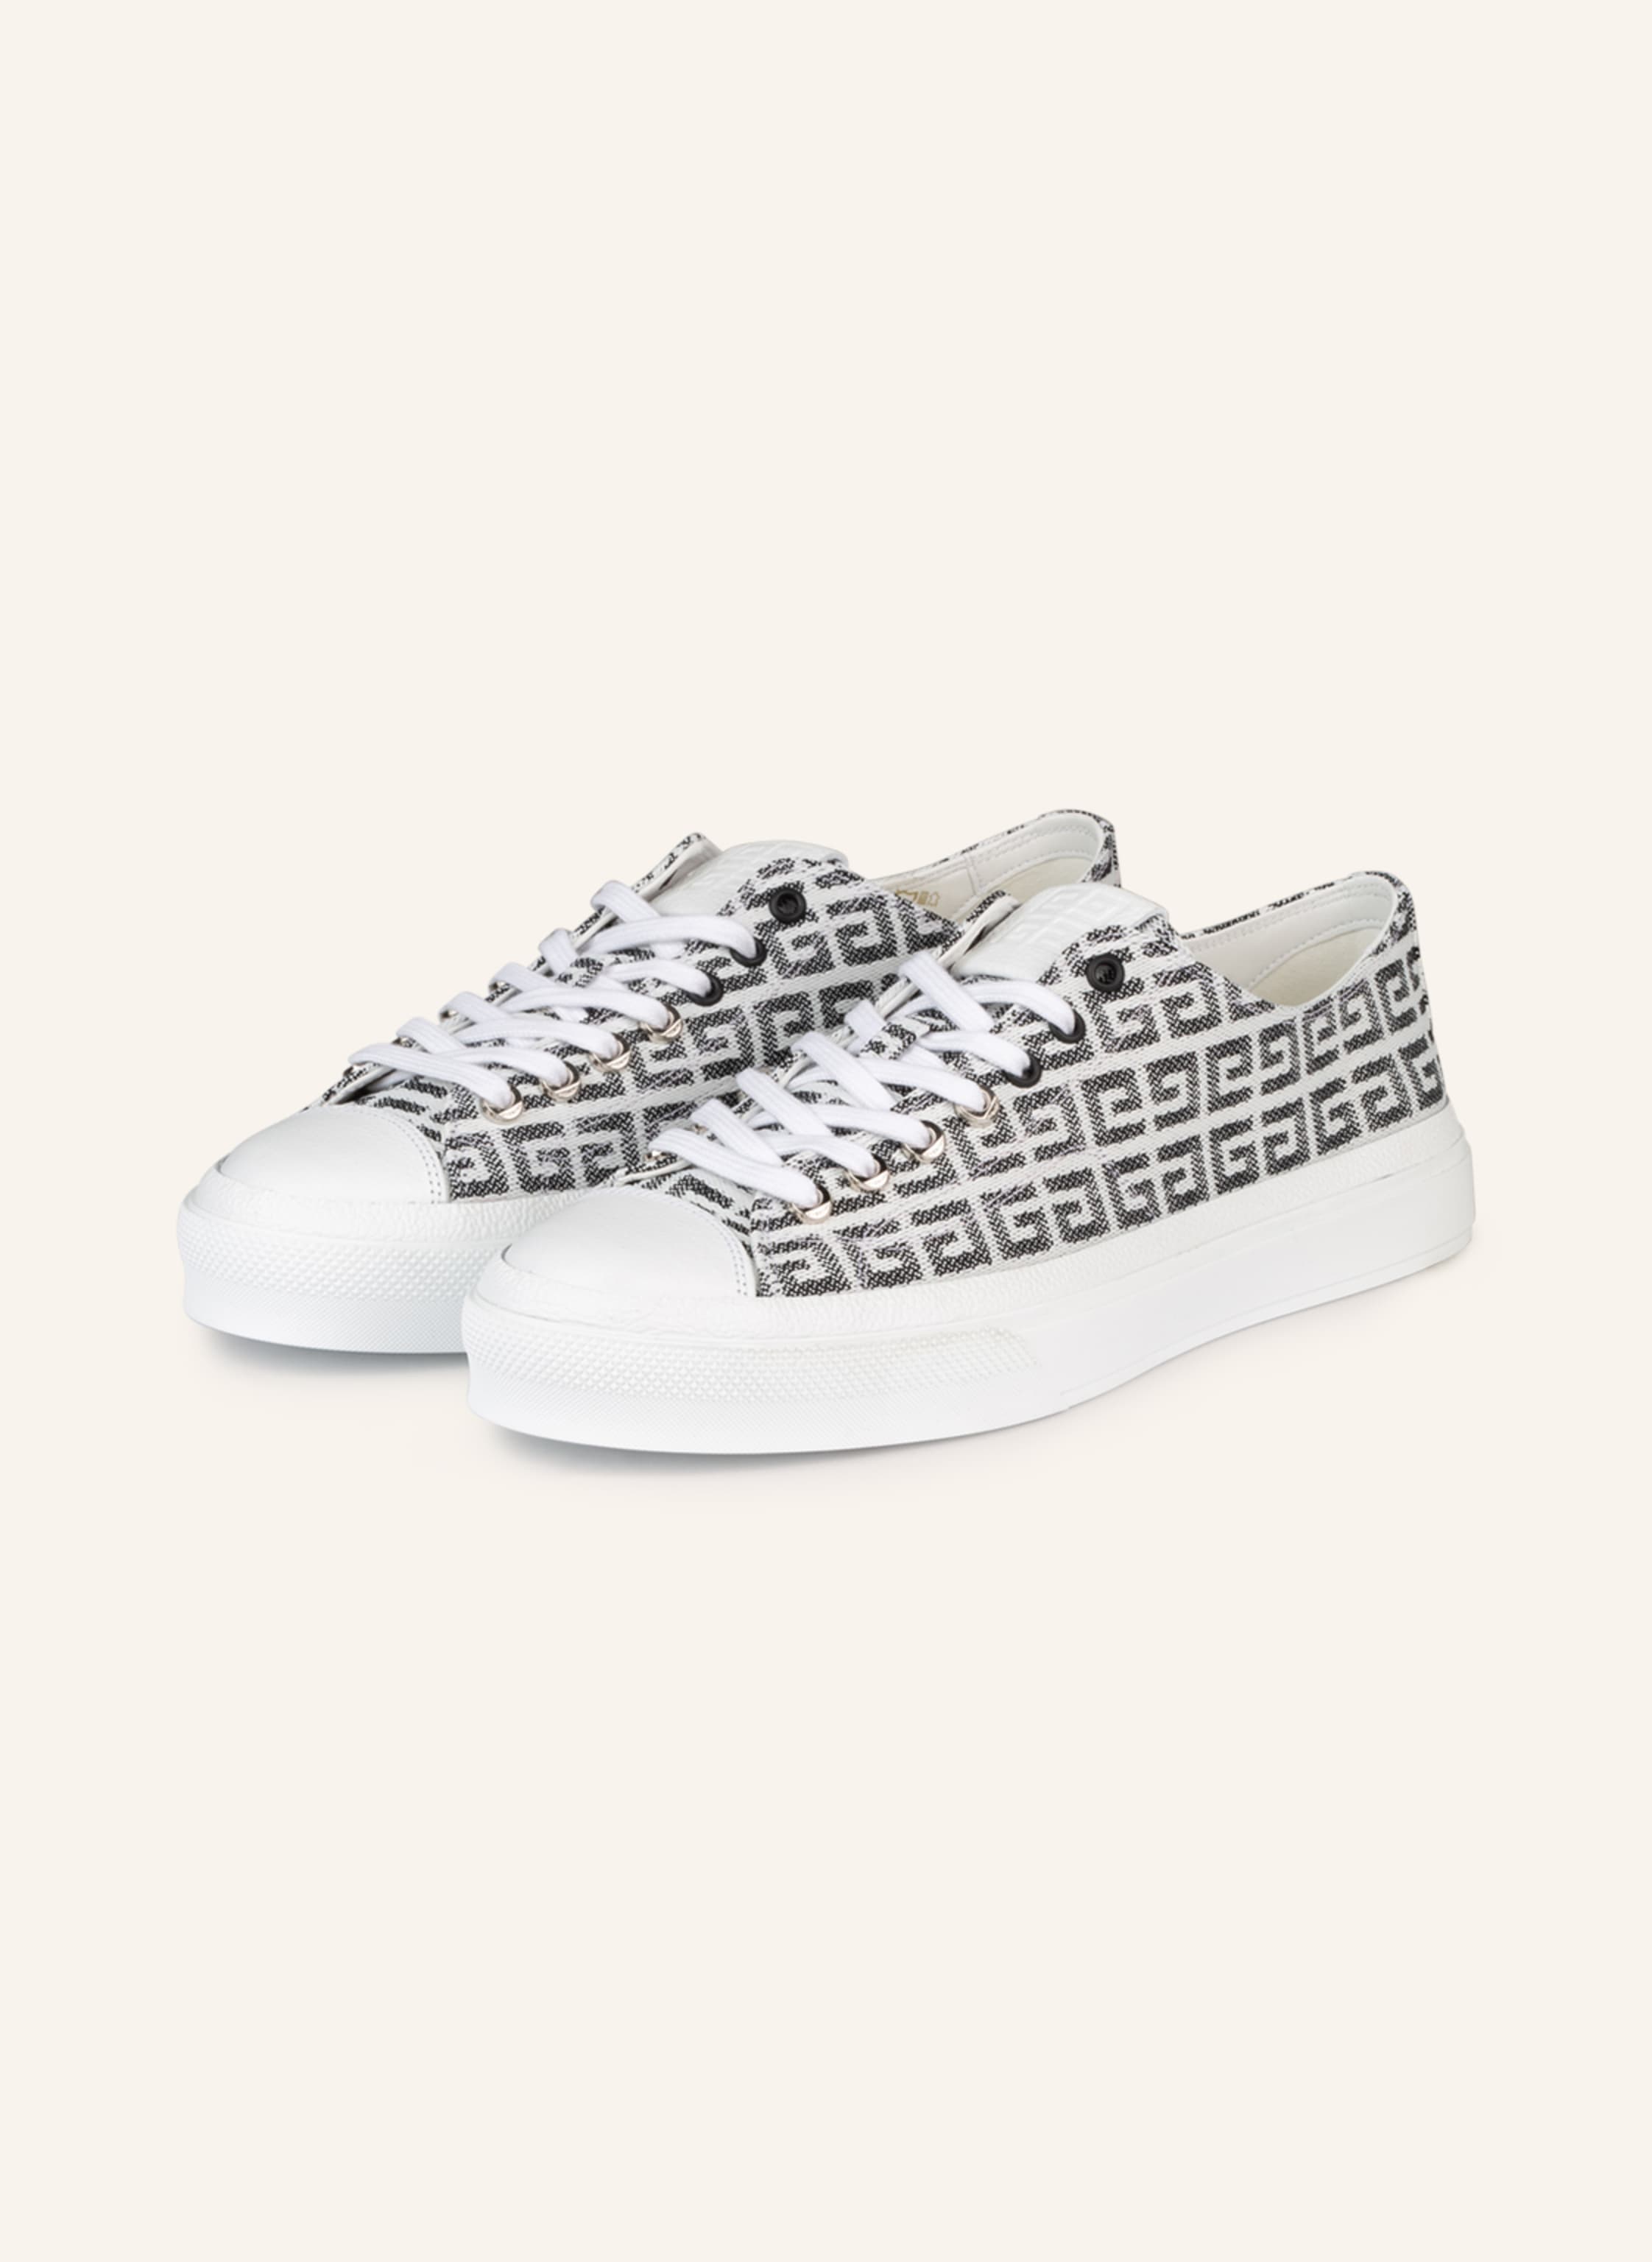 GIVENCHY Sneakers in black/ white | Breuninger